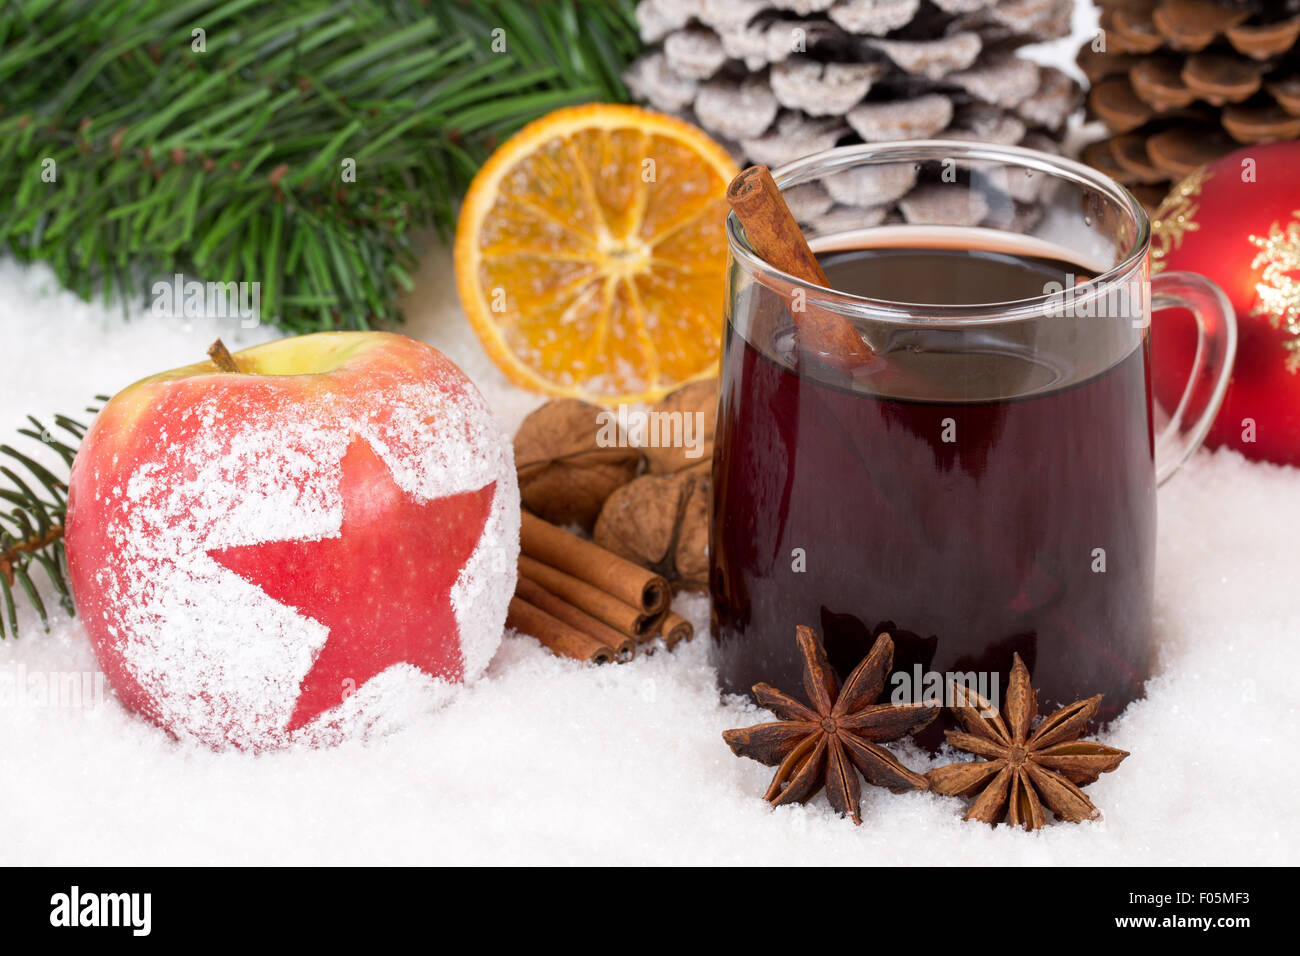 Winter apple fruit and mulled wine alcohol drink on Christmas decoration with snow Stock Photo